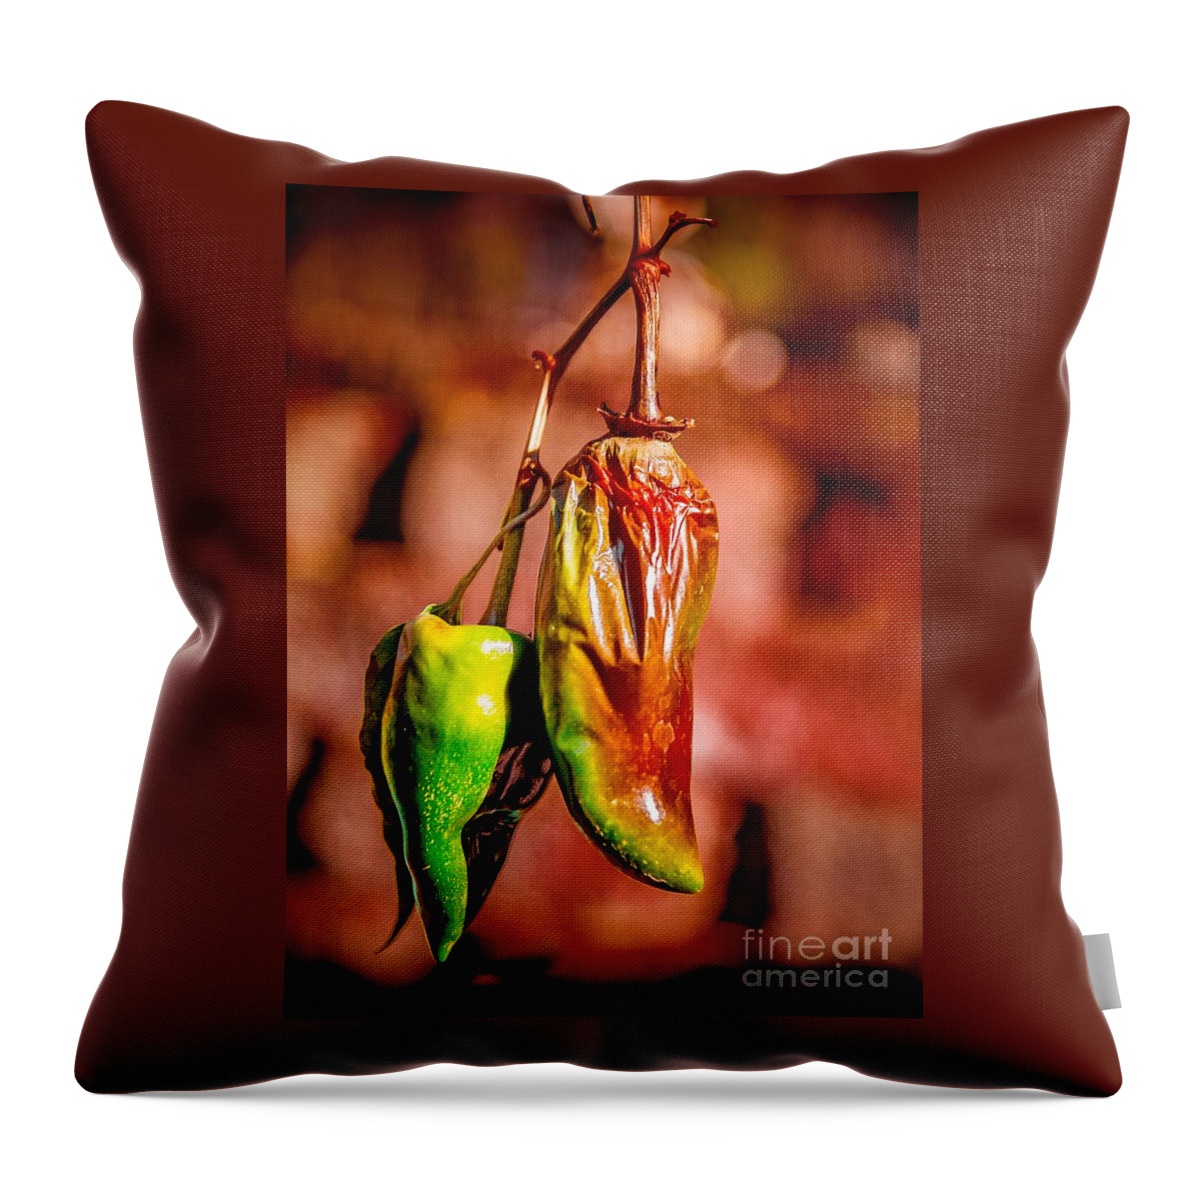 Peppers Throw Pillow featuring the photograph The Last Peppers by Jim DeLillo